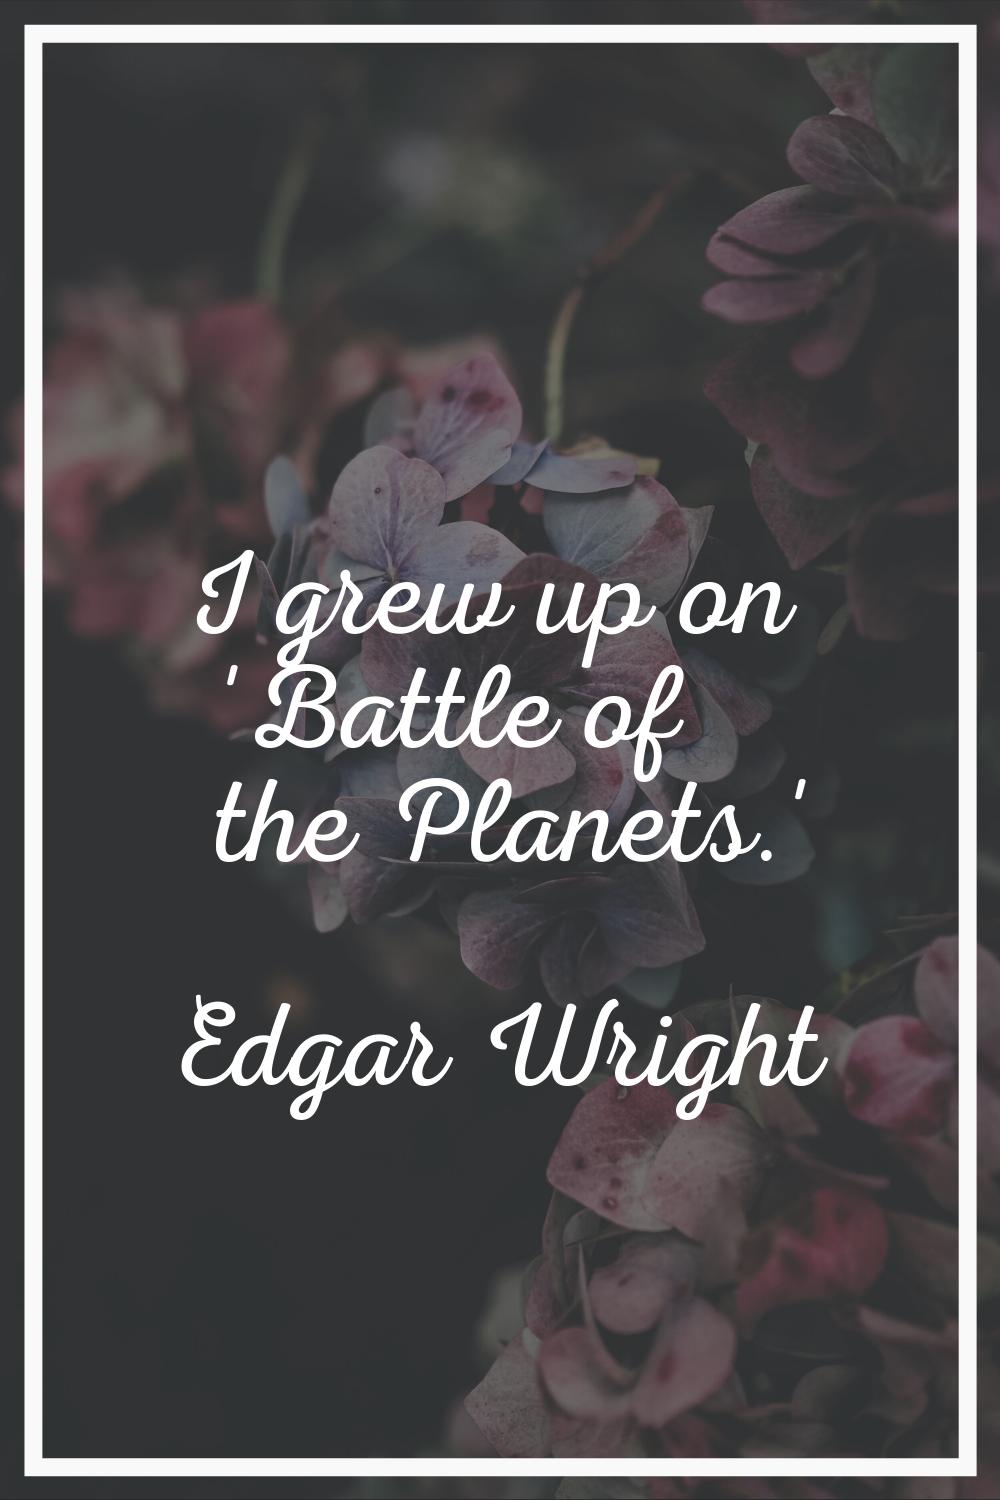 I grew up on 'Battle of the Planets.'